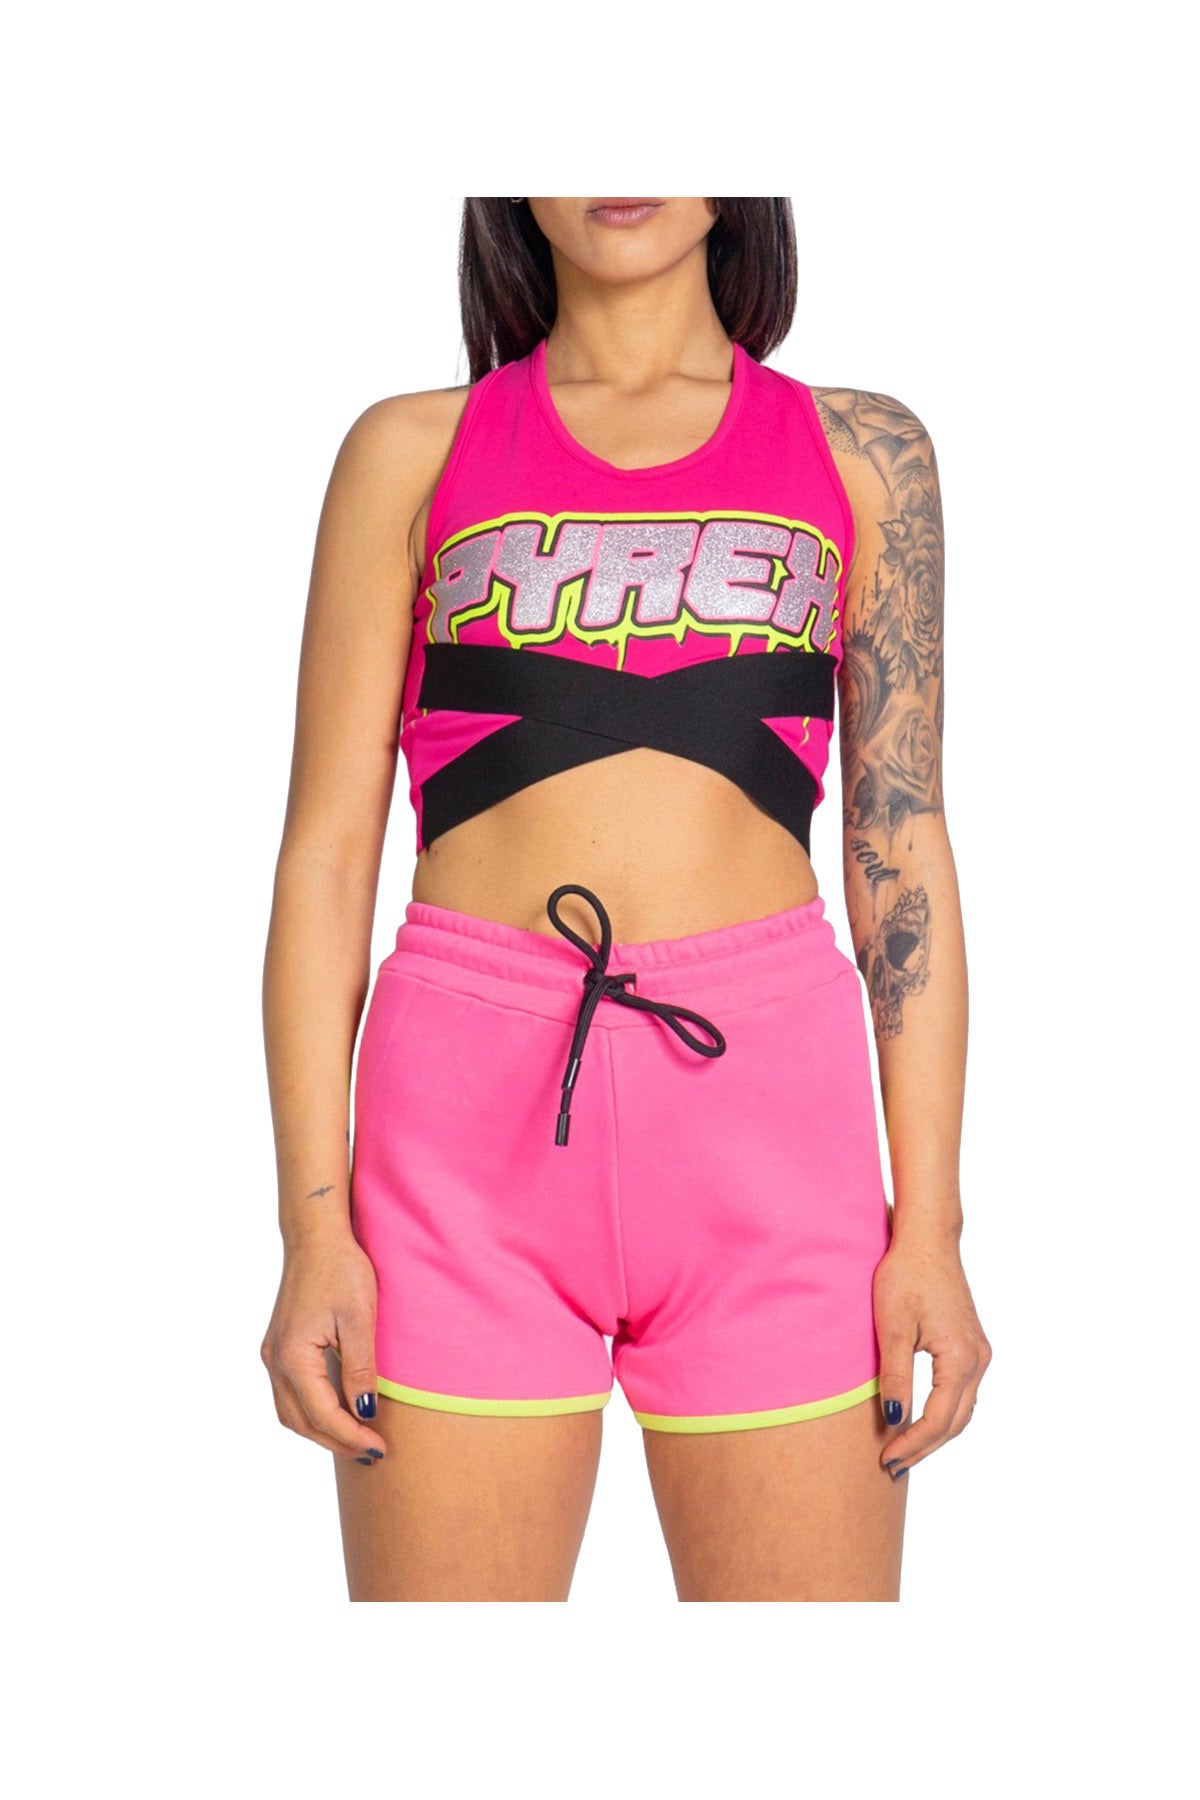 Top Logo Frontale Fuxia